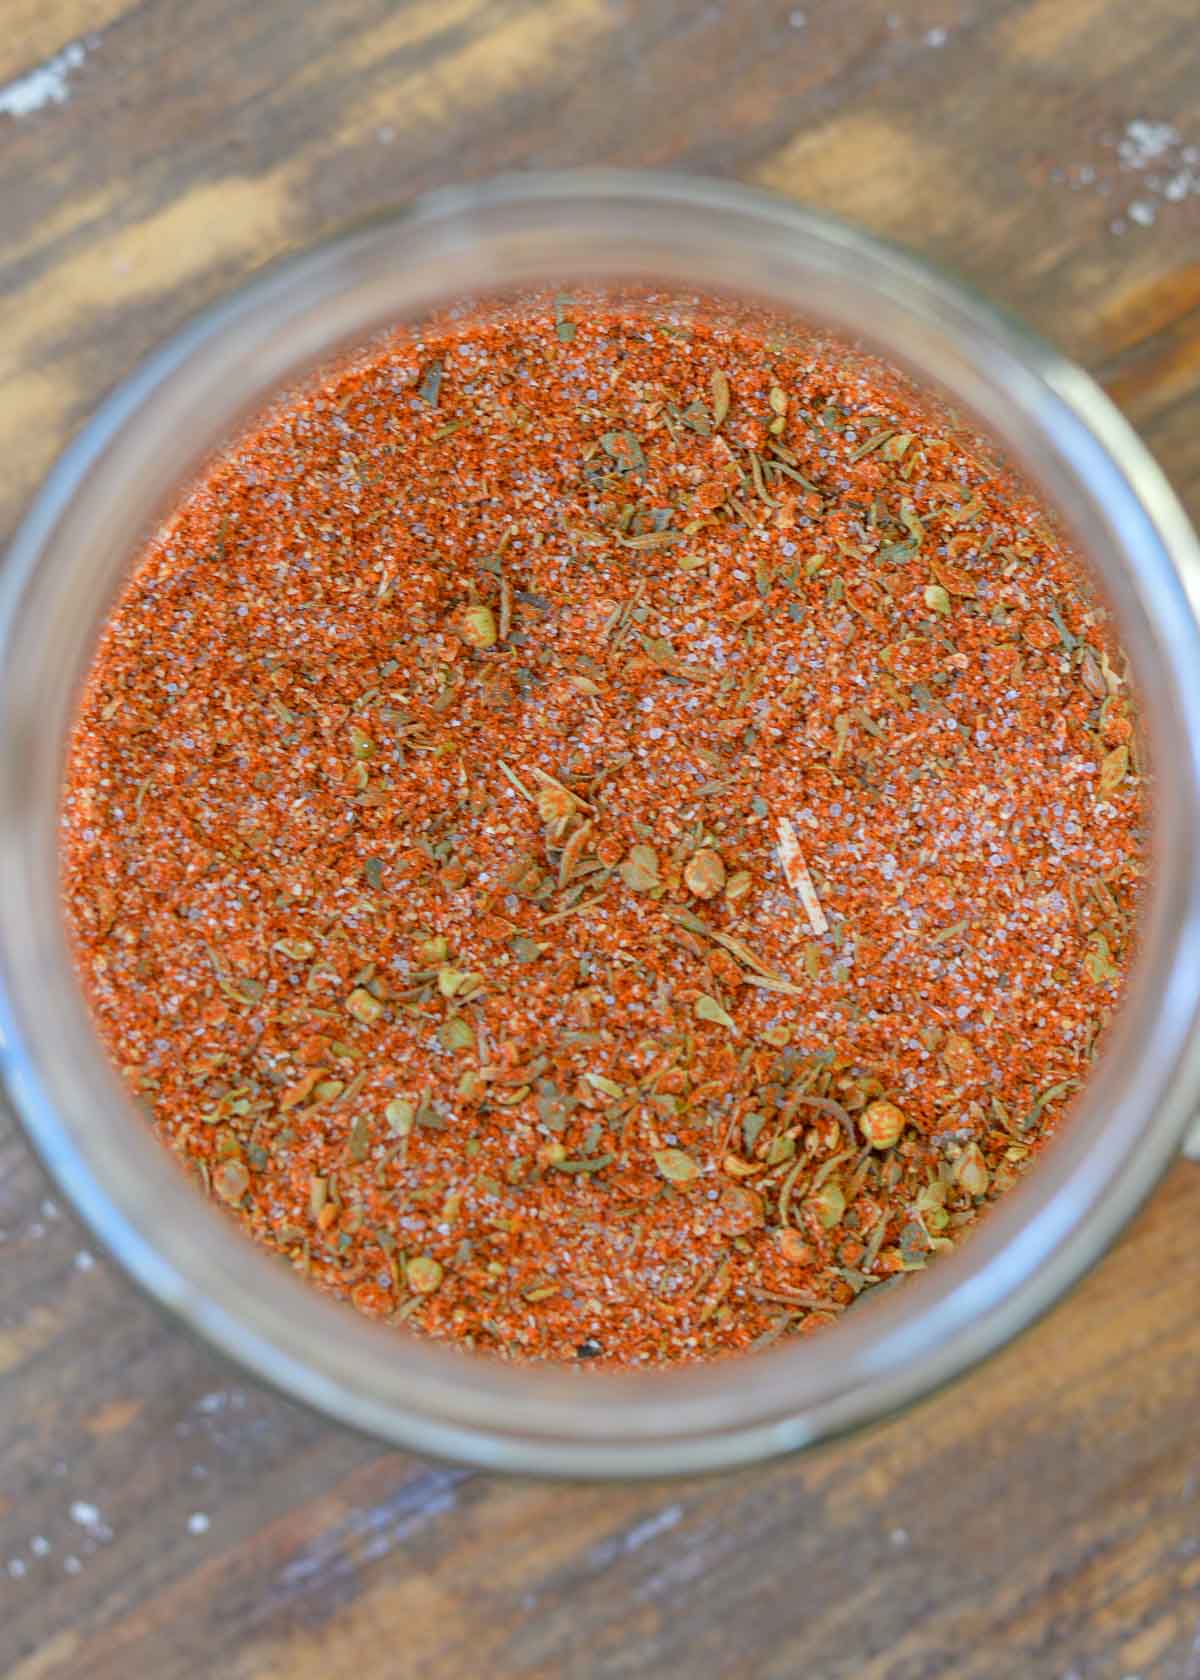 This easy Homemade Cajun Seasoning Mix will add great flavor to any recipe! Easily adjust the level of heat depending on your preferences.